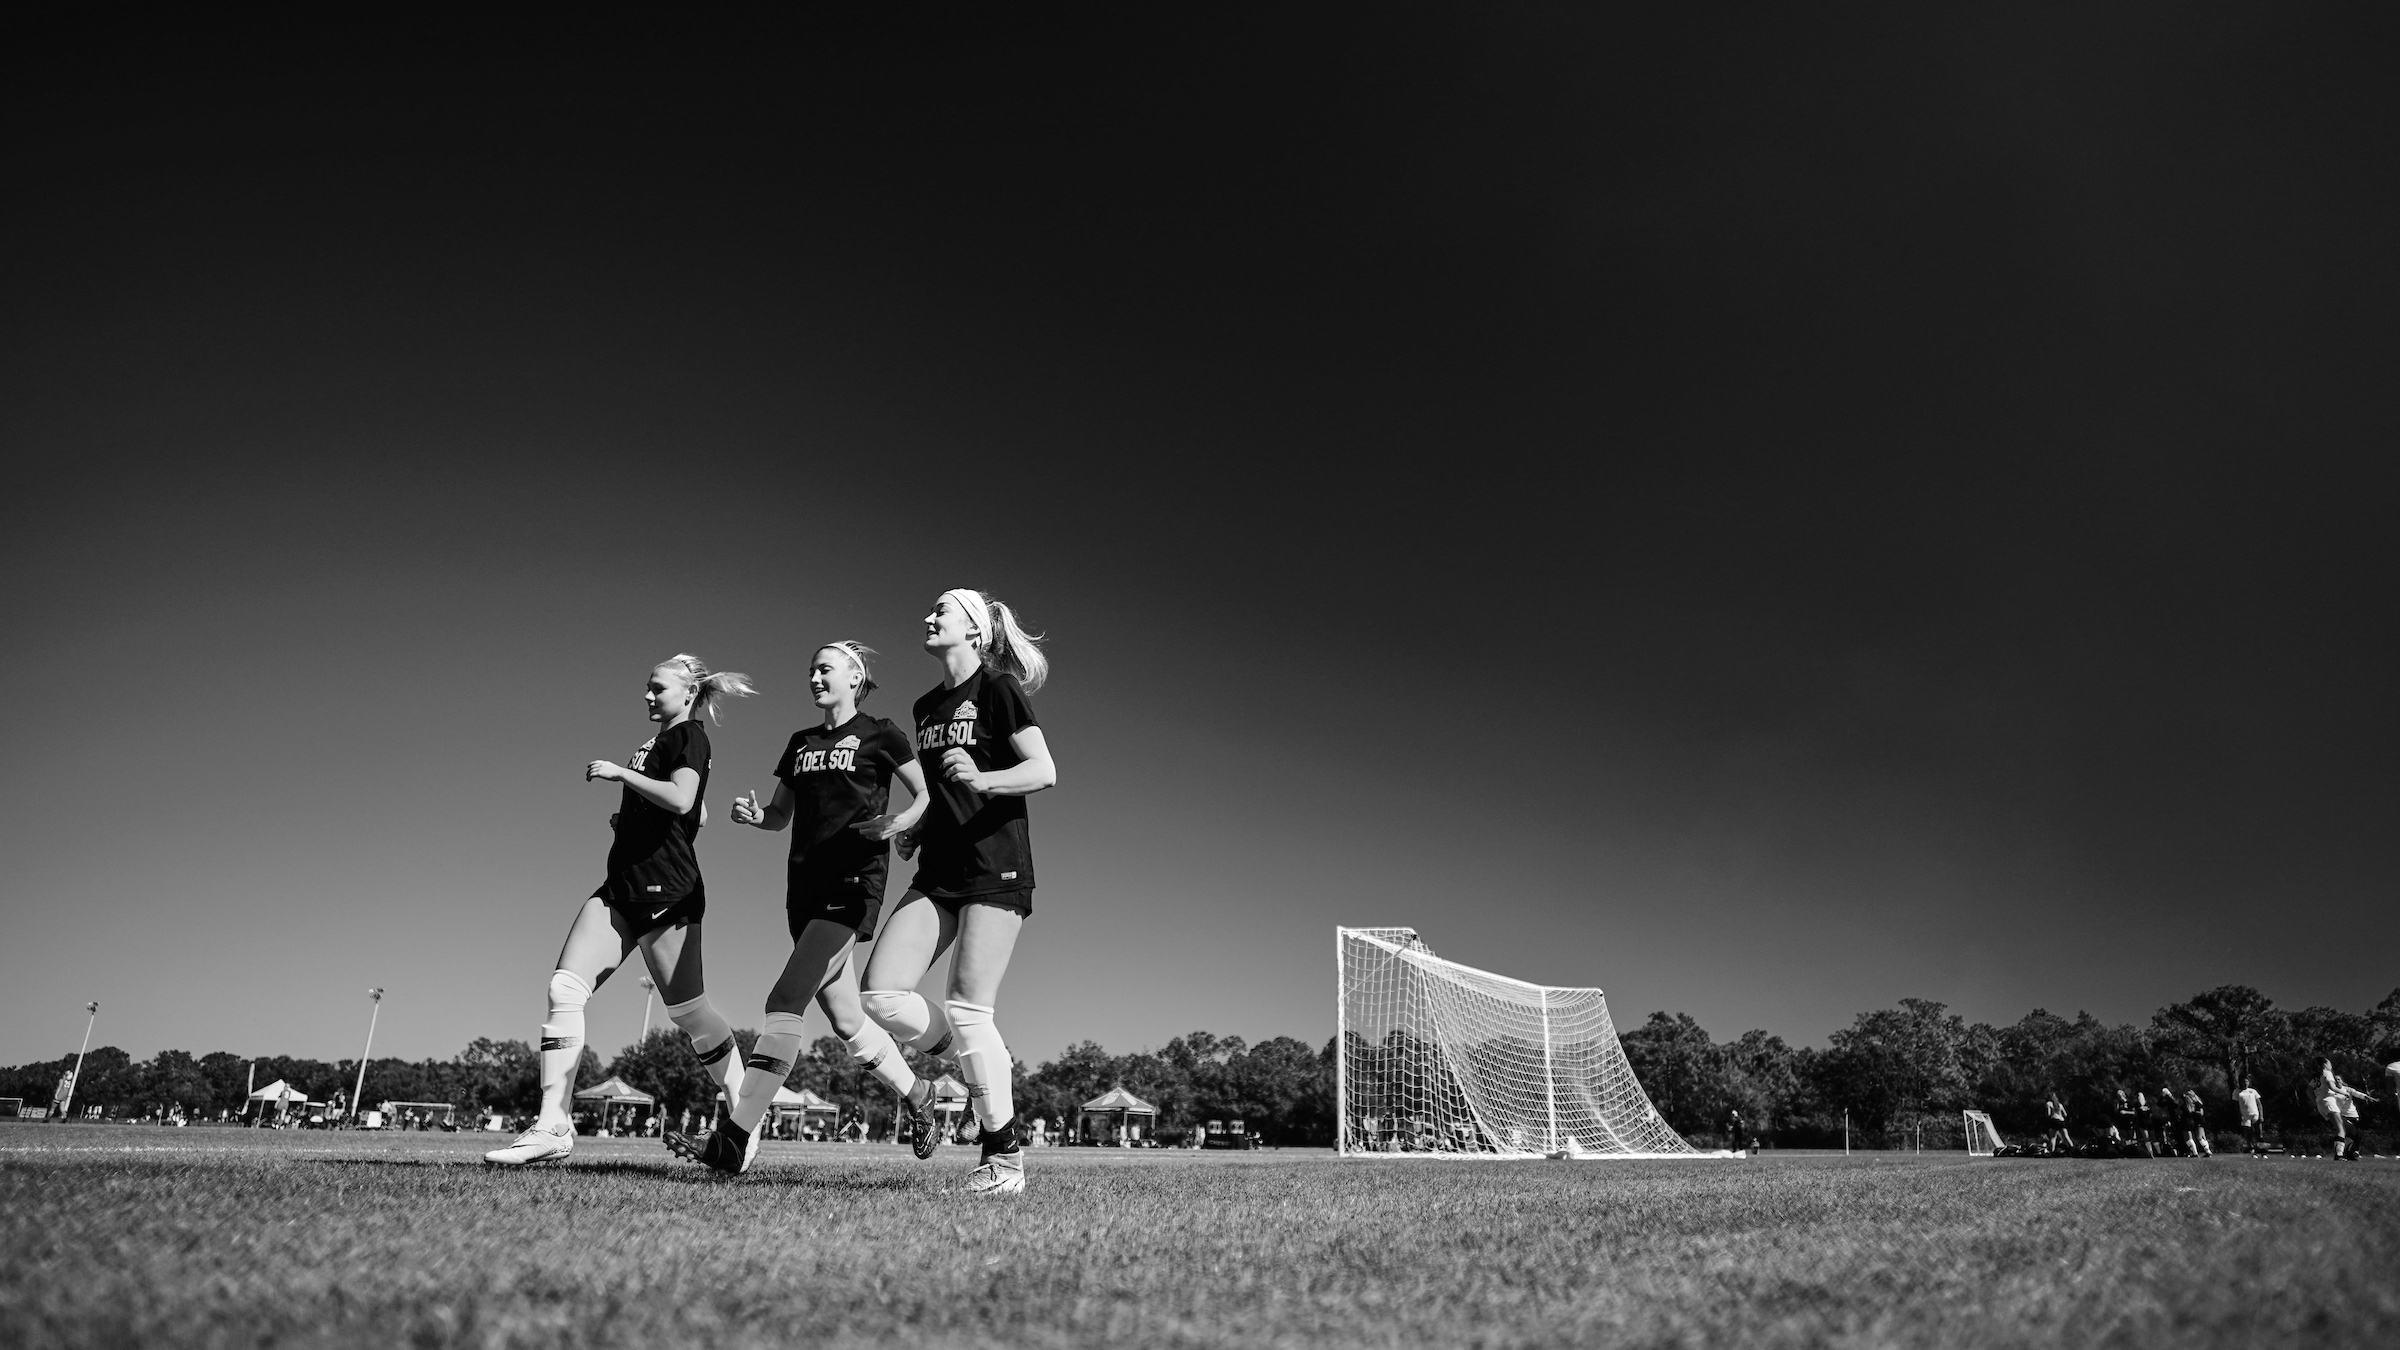 Social and Relational Wellness: How to Help Youth Soccer Players Develop Healthy Relationships